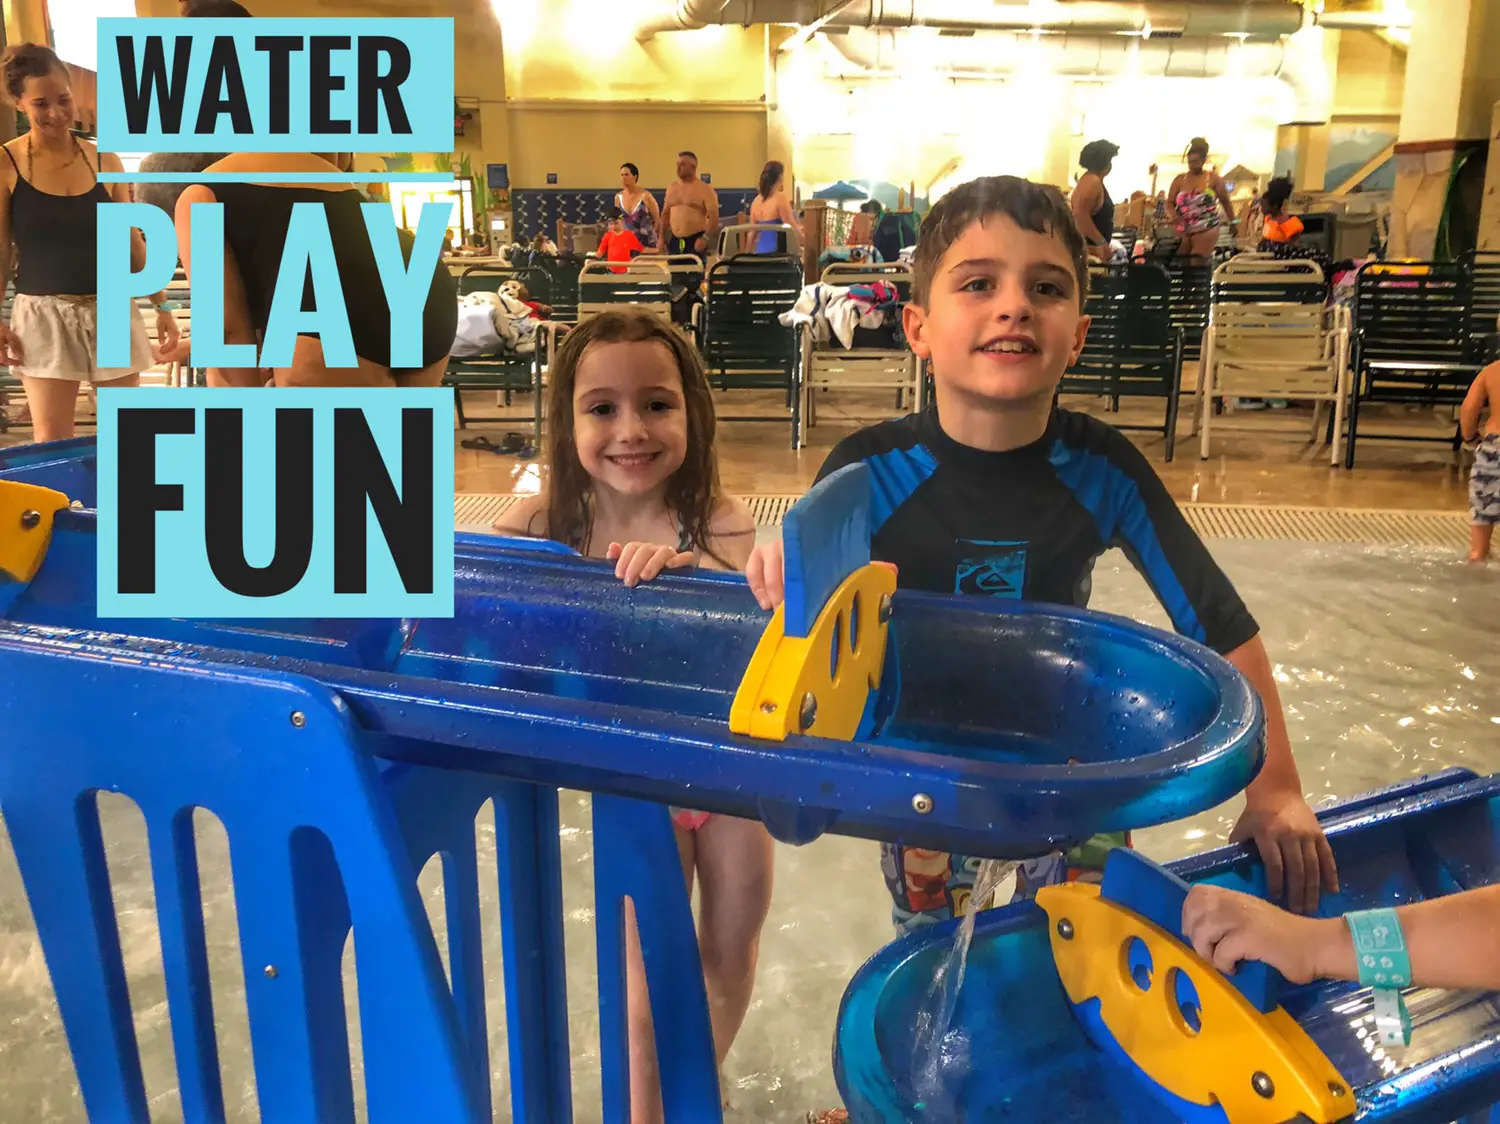 Water Safety Tips from Great Wolf Lodge to make sure family water play is safe & fun!